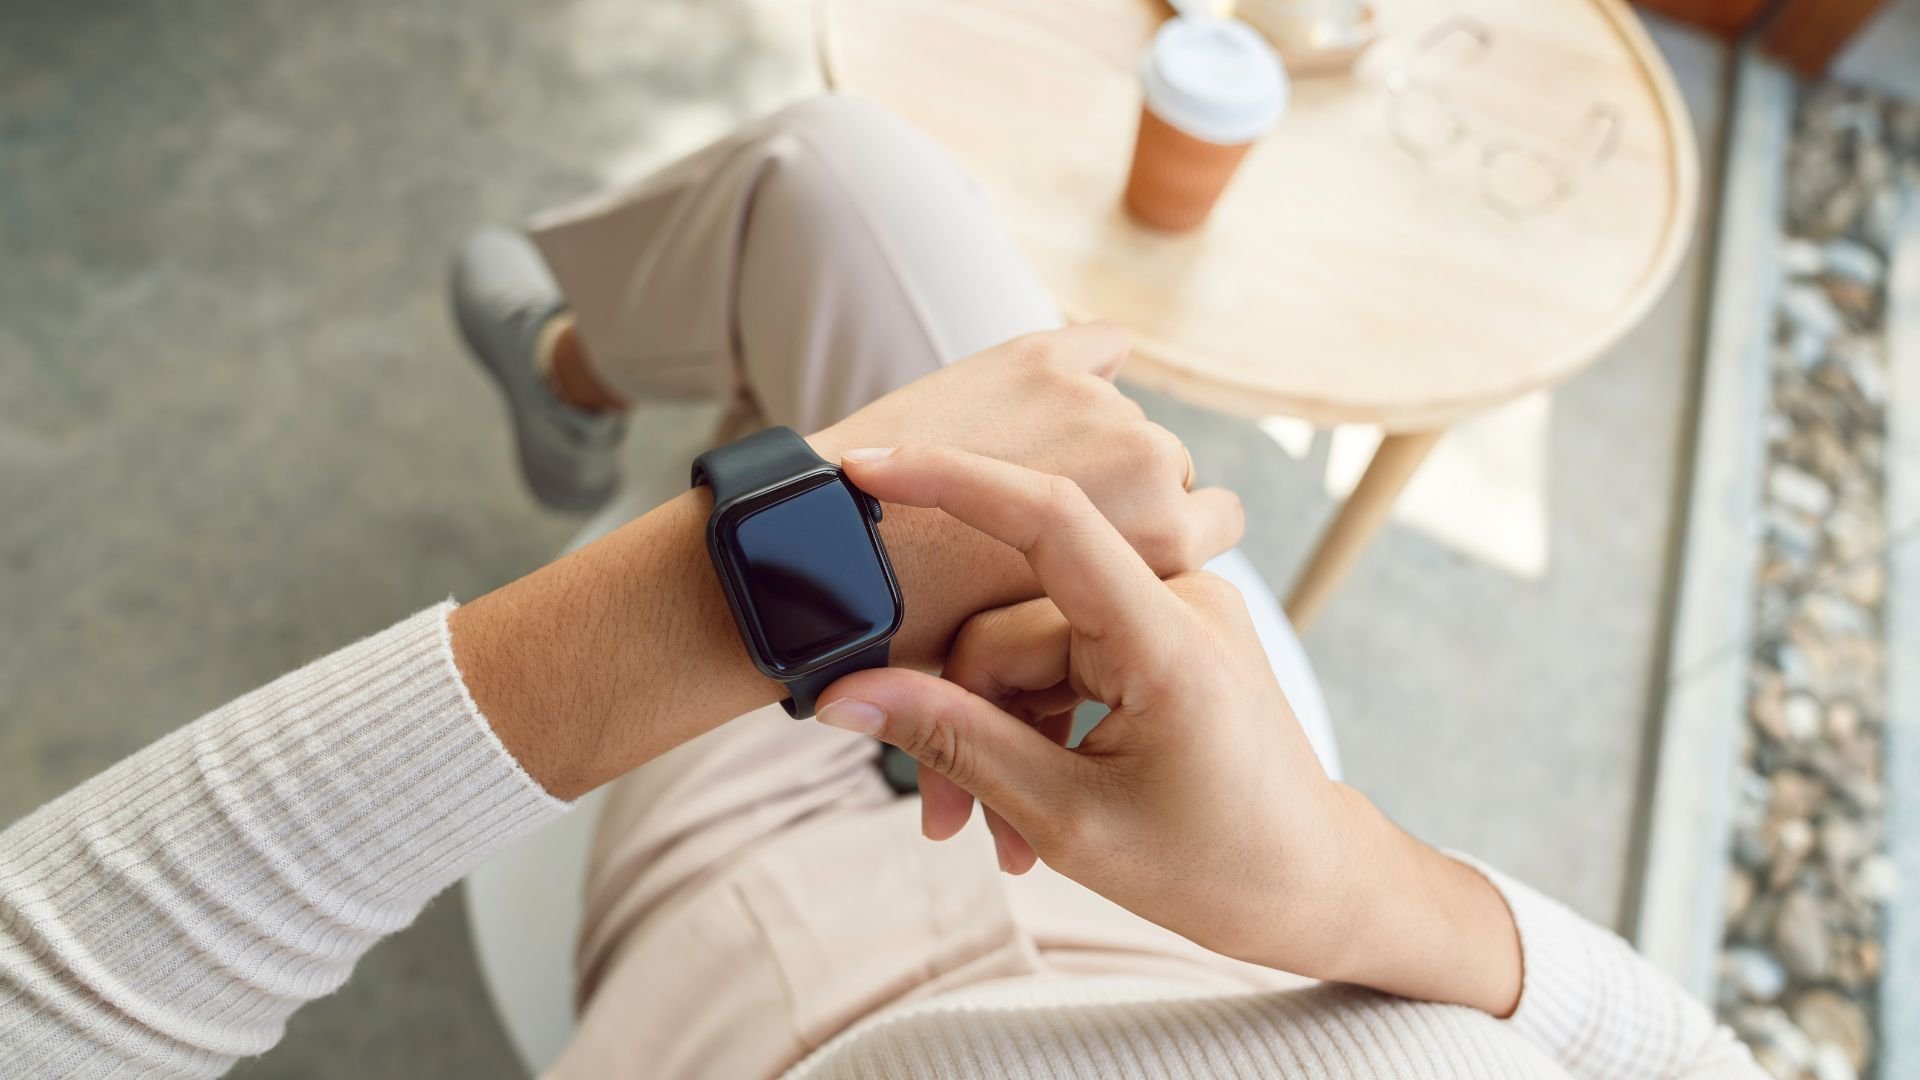 Woman at coffee table with Apple style watch on wrist